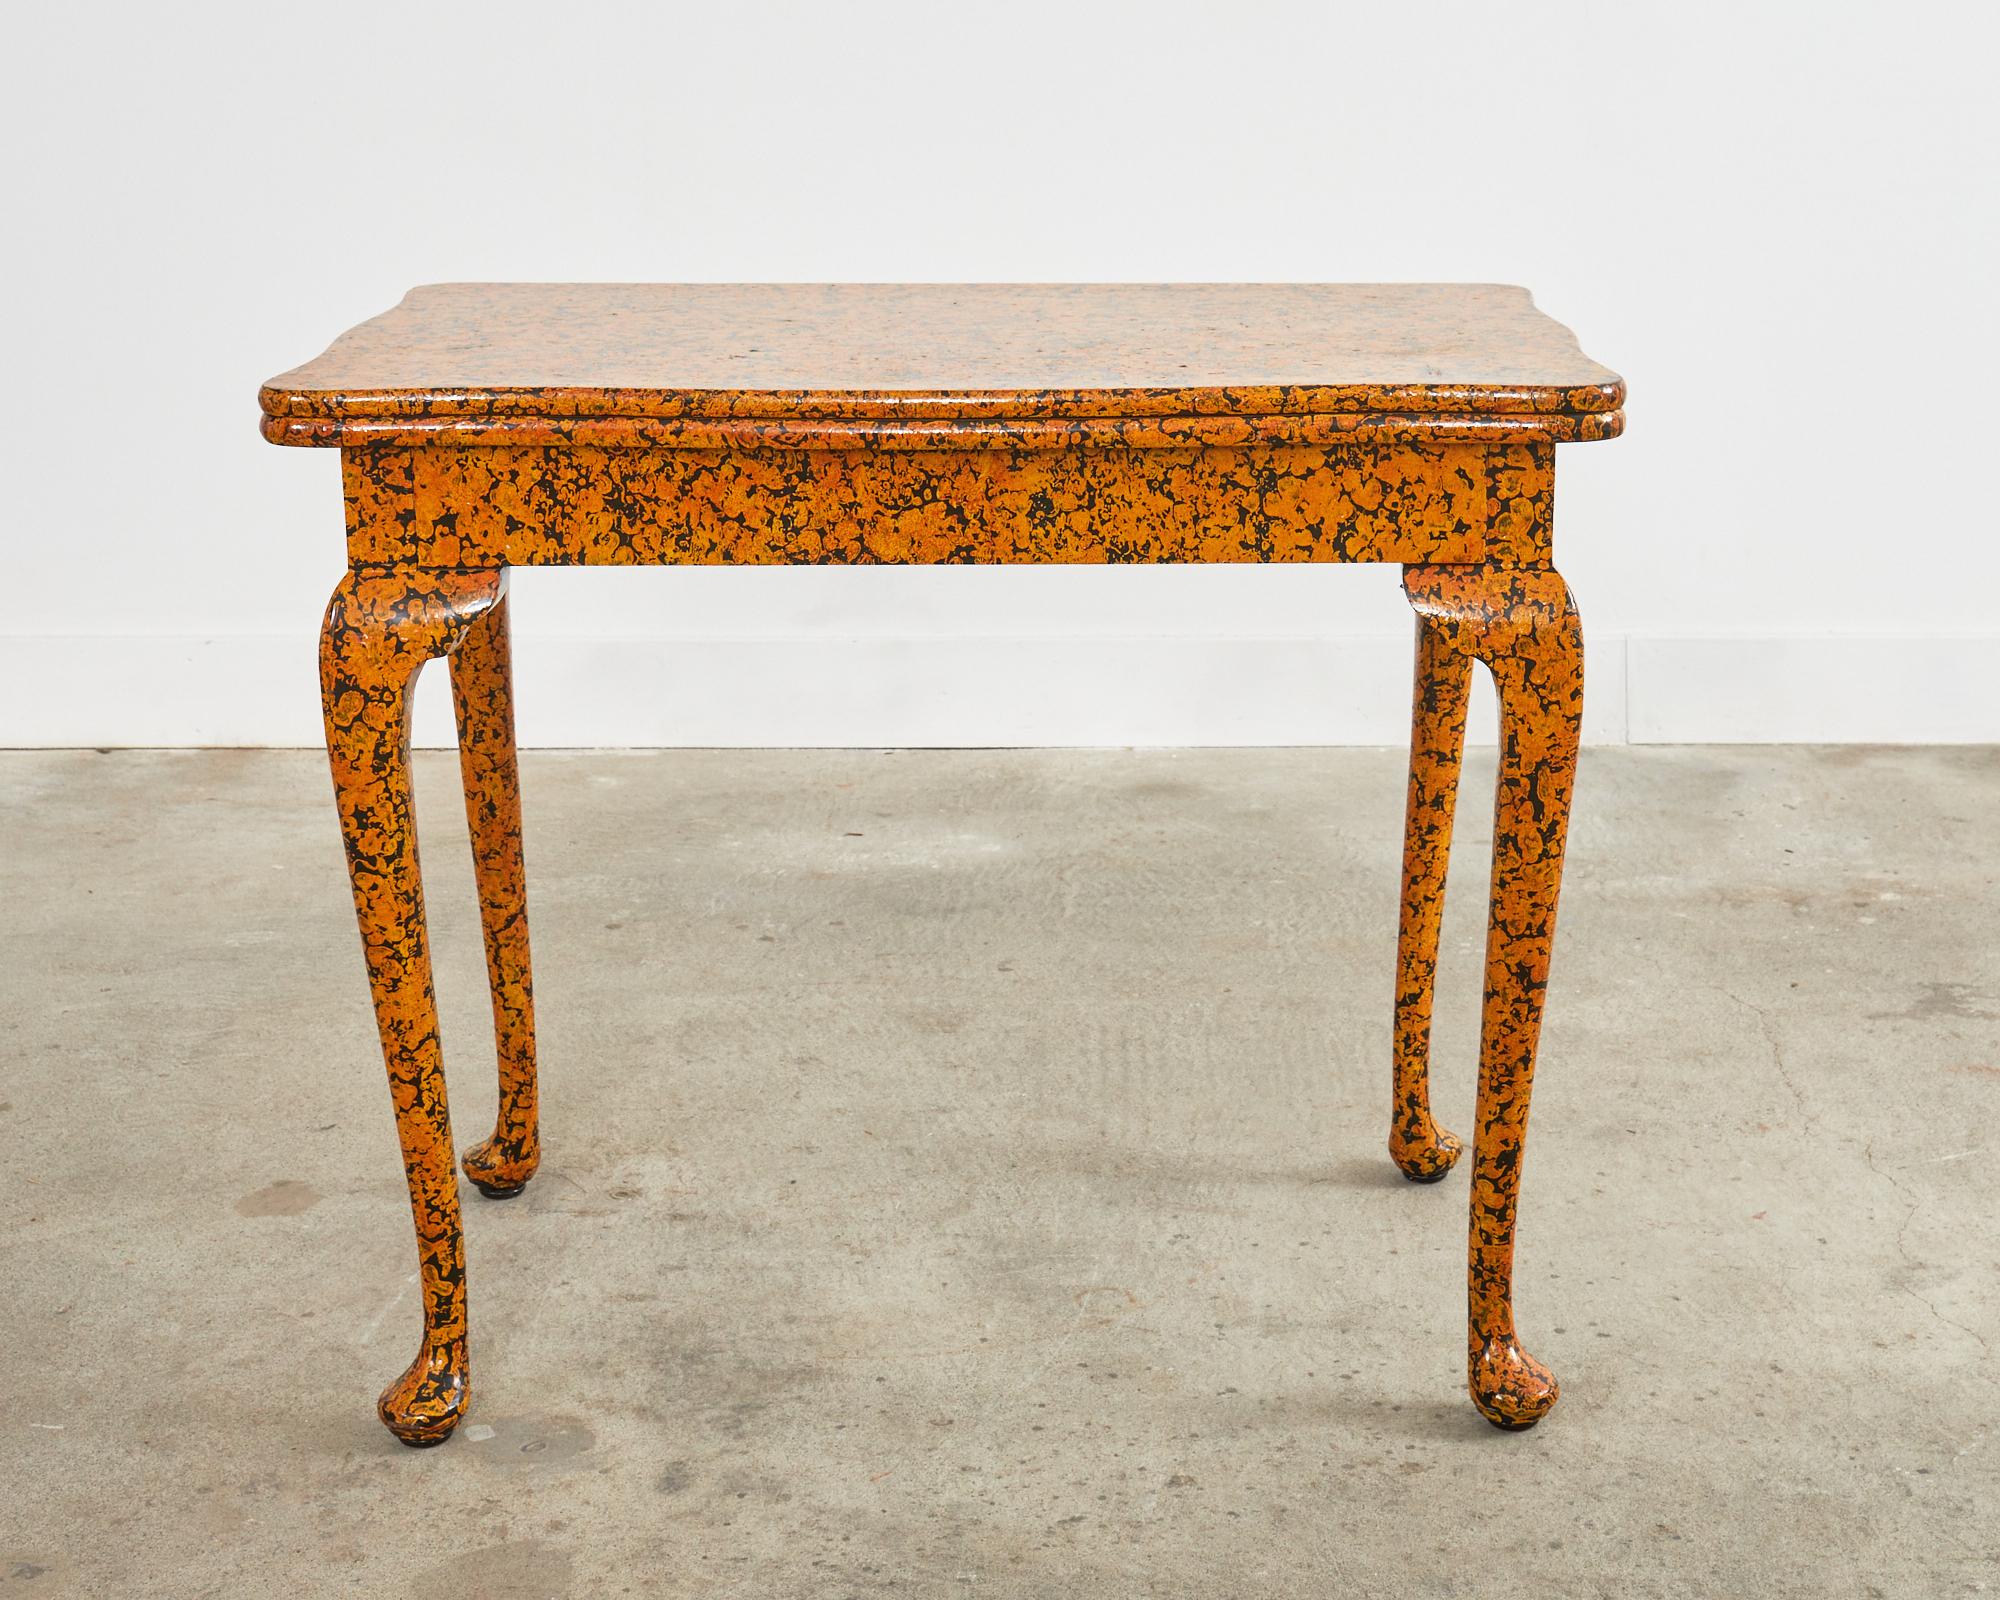 Lacquered Queen Anne Style Games Table Desk Speckled by Ira Yeager